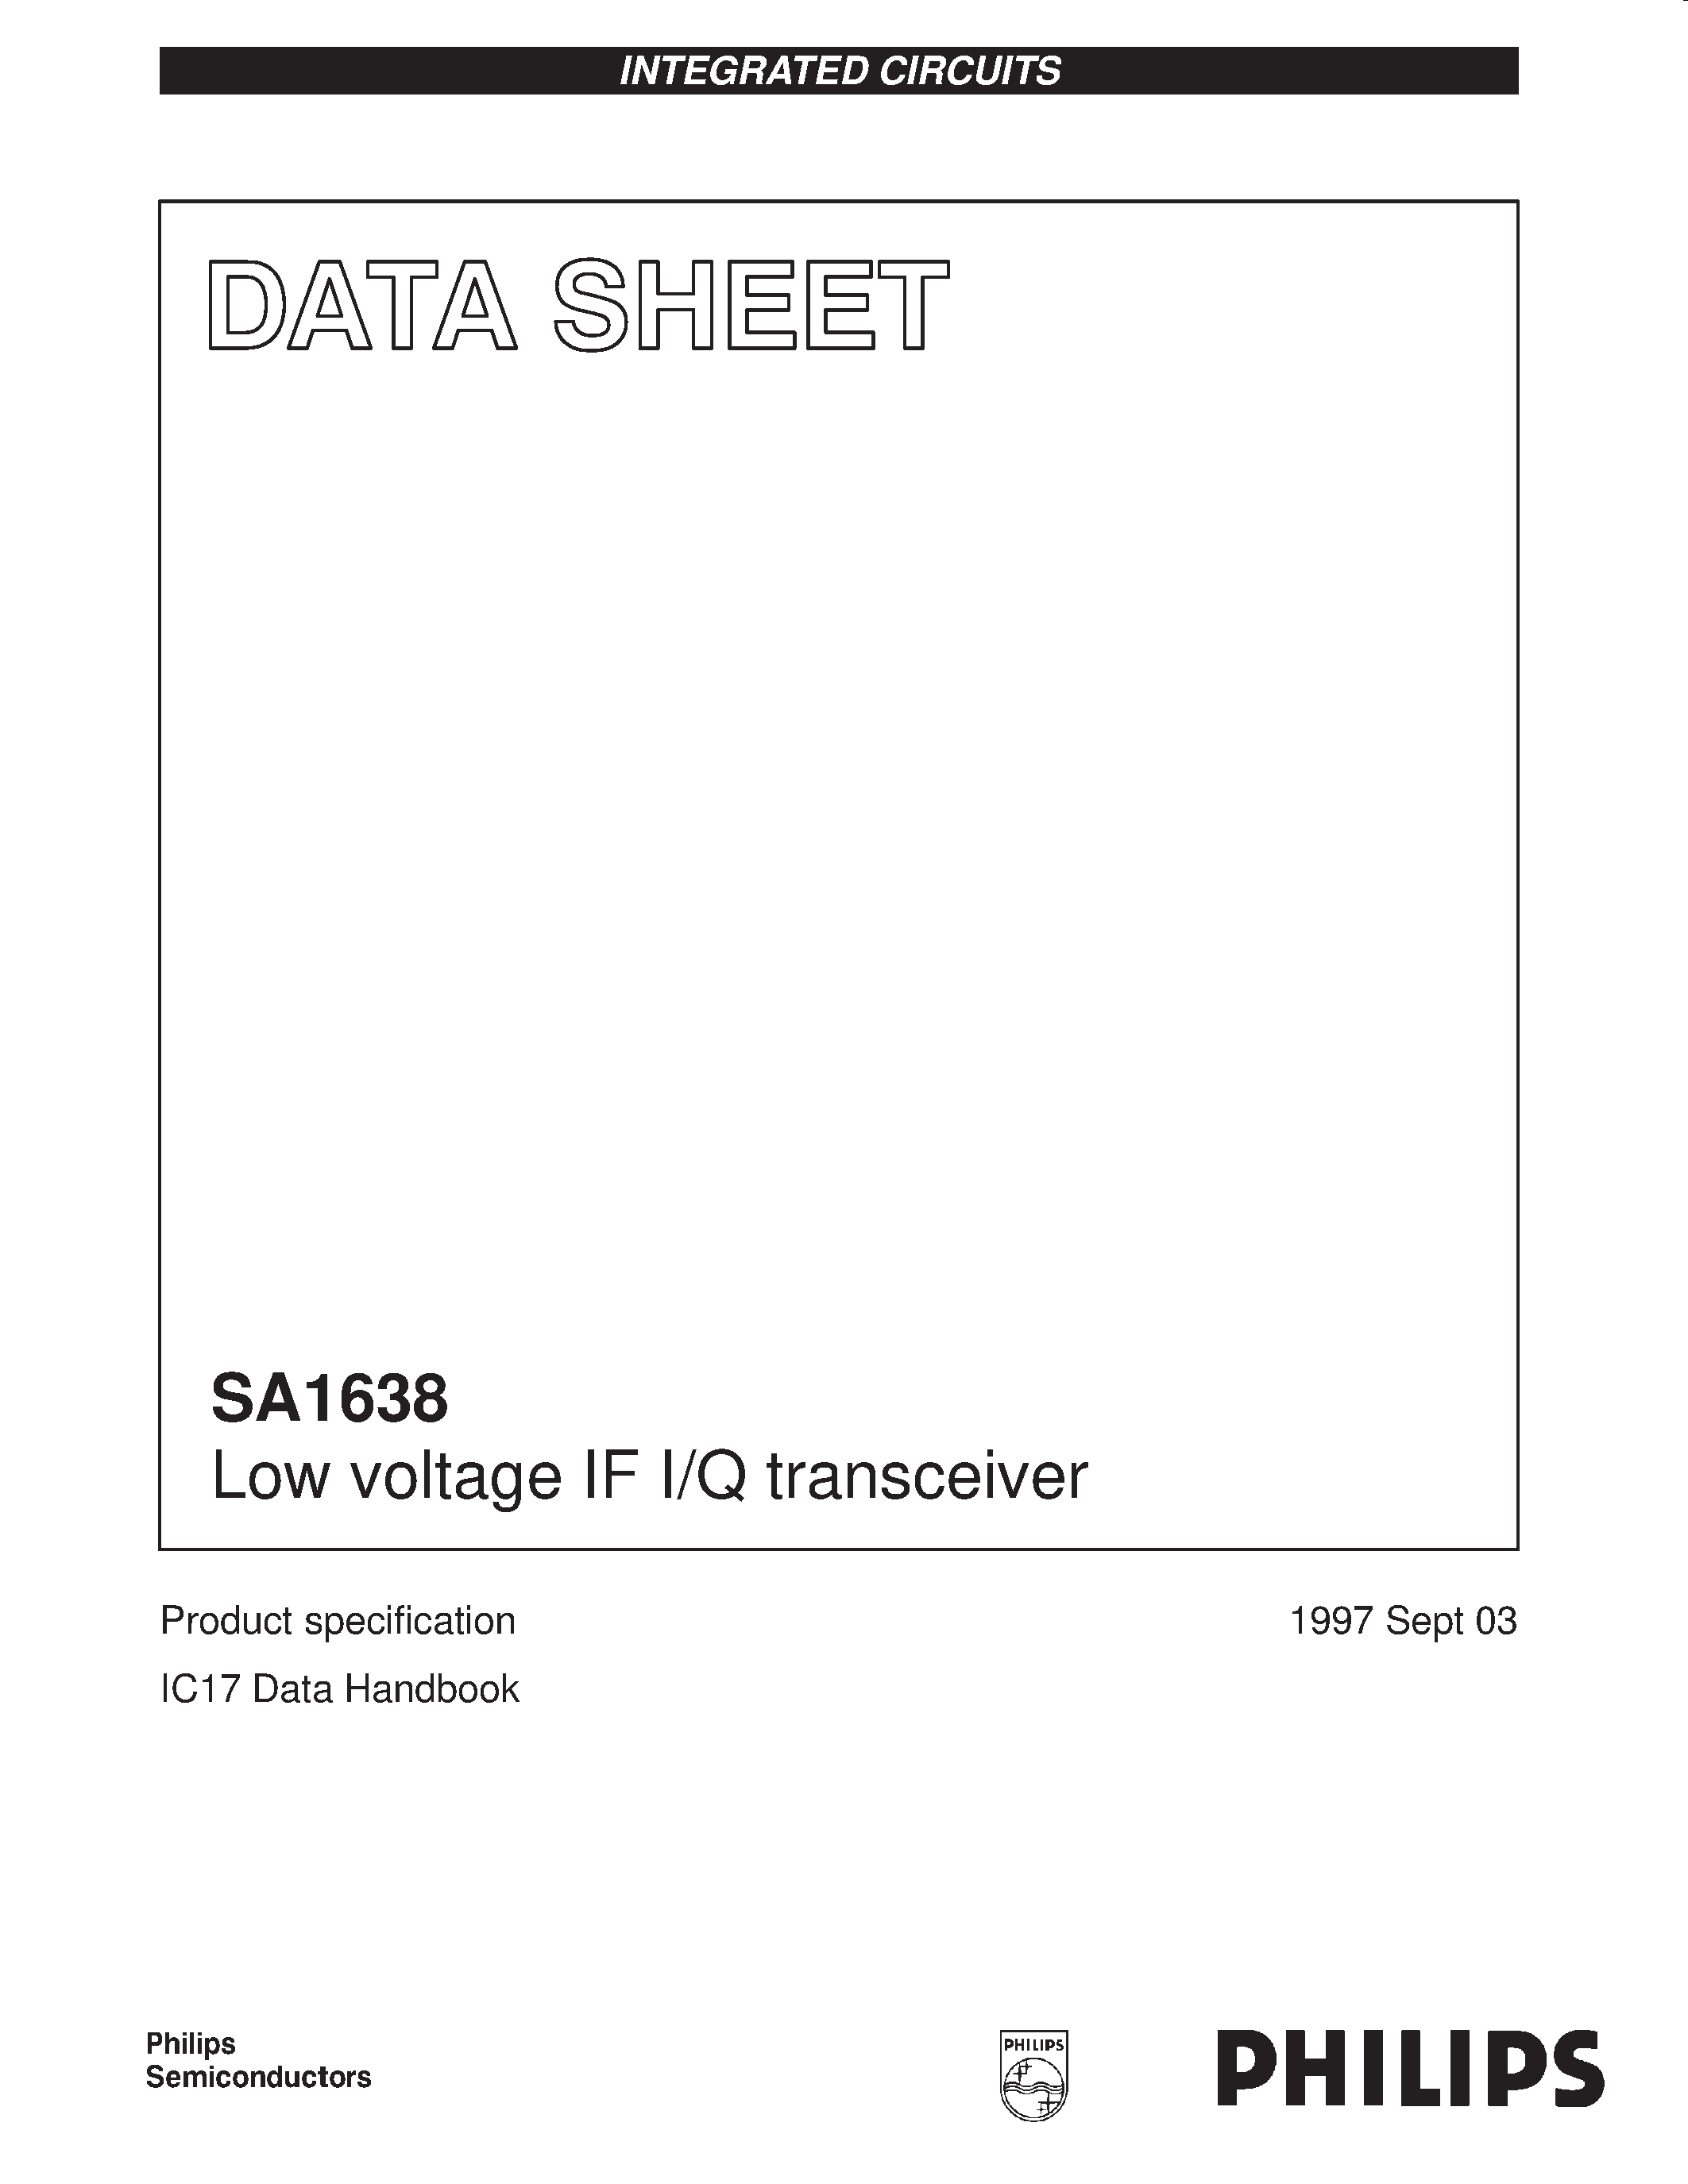 Datasheet SA1638 - Low voltage IF I/Q transceiver page 1